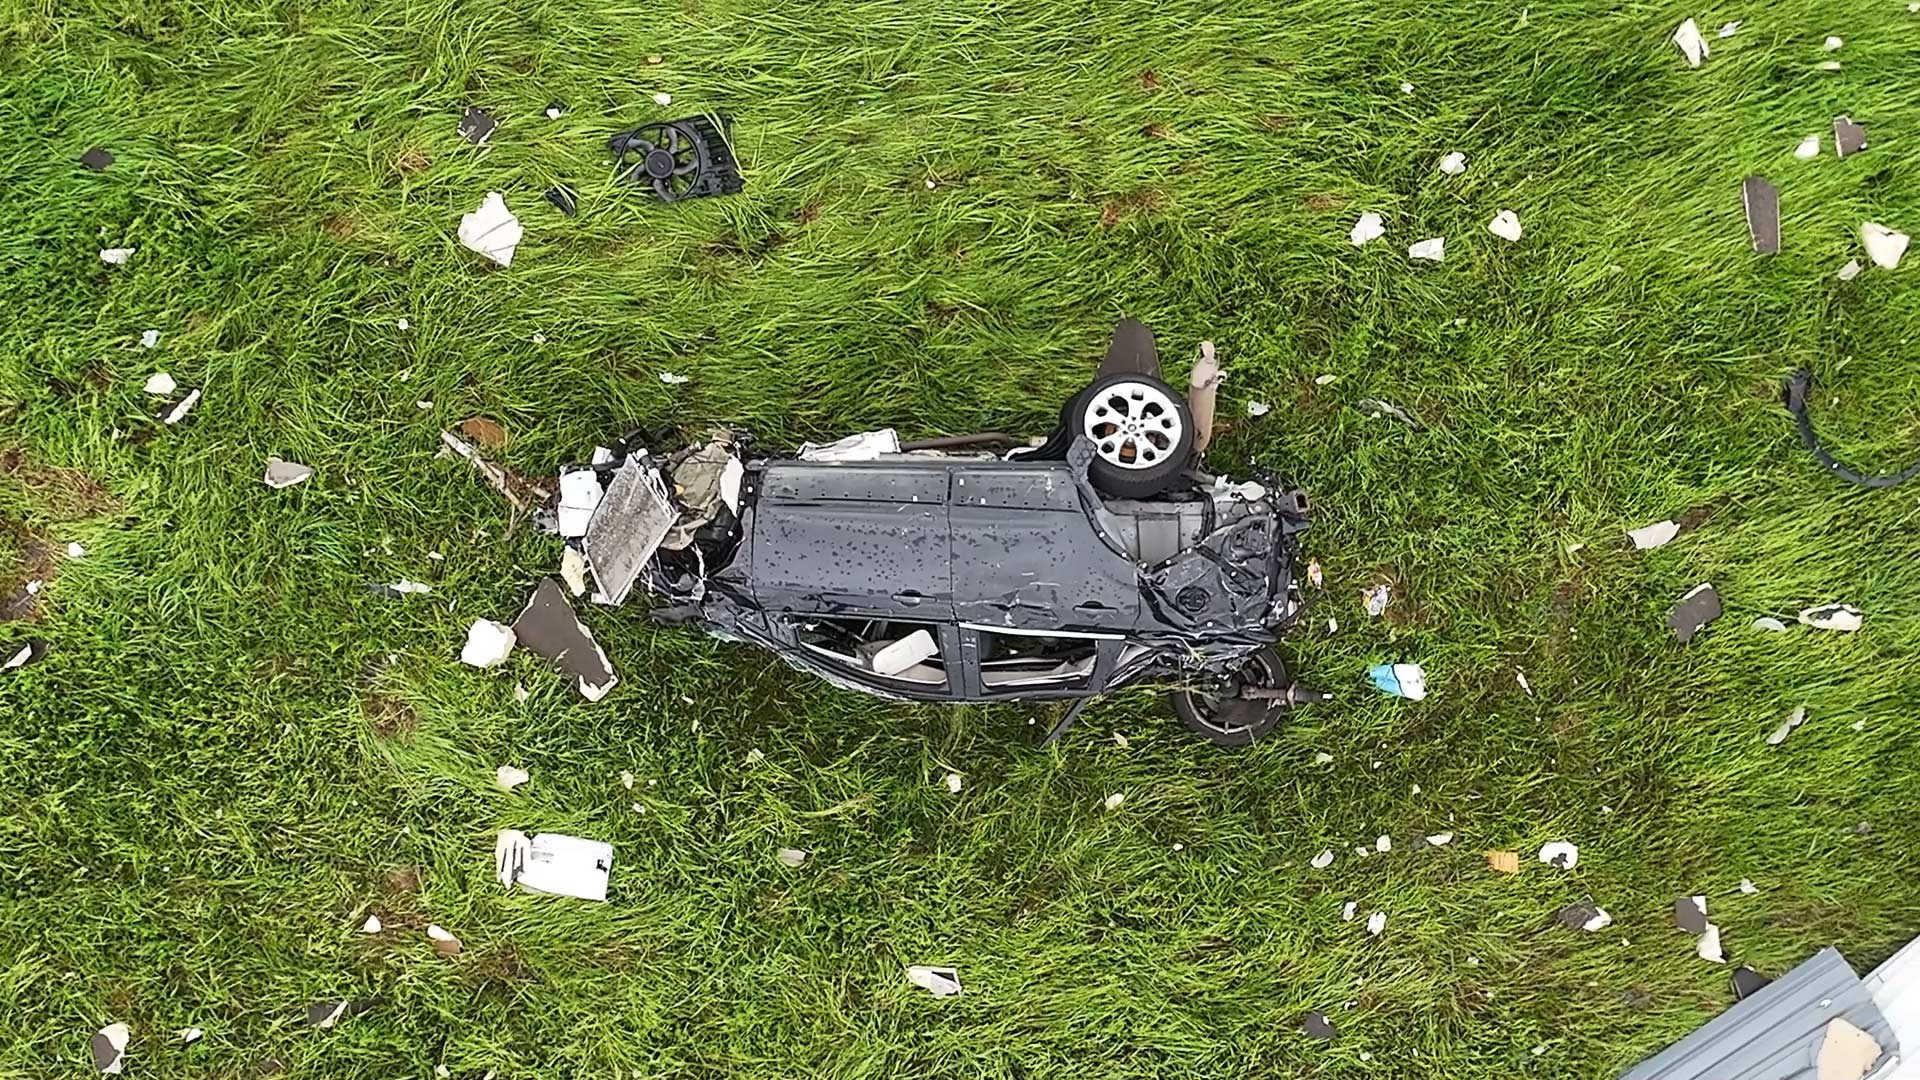 A car, completely totaled, lies in a field after likely being thrown by the violent winds of a tornado.